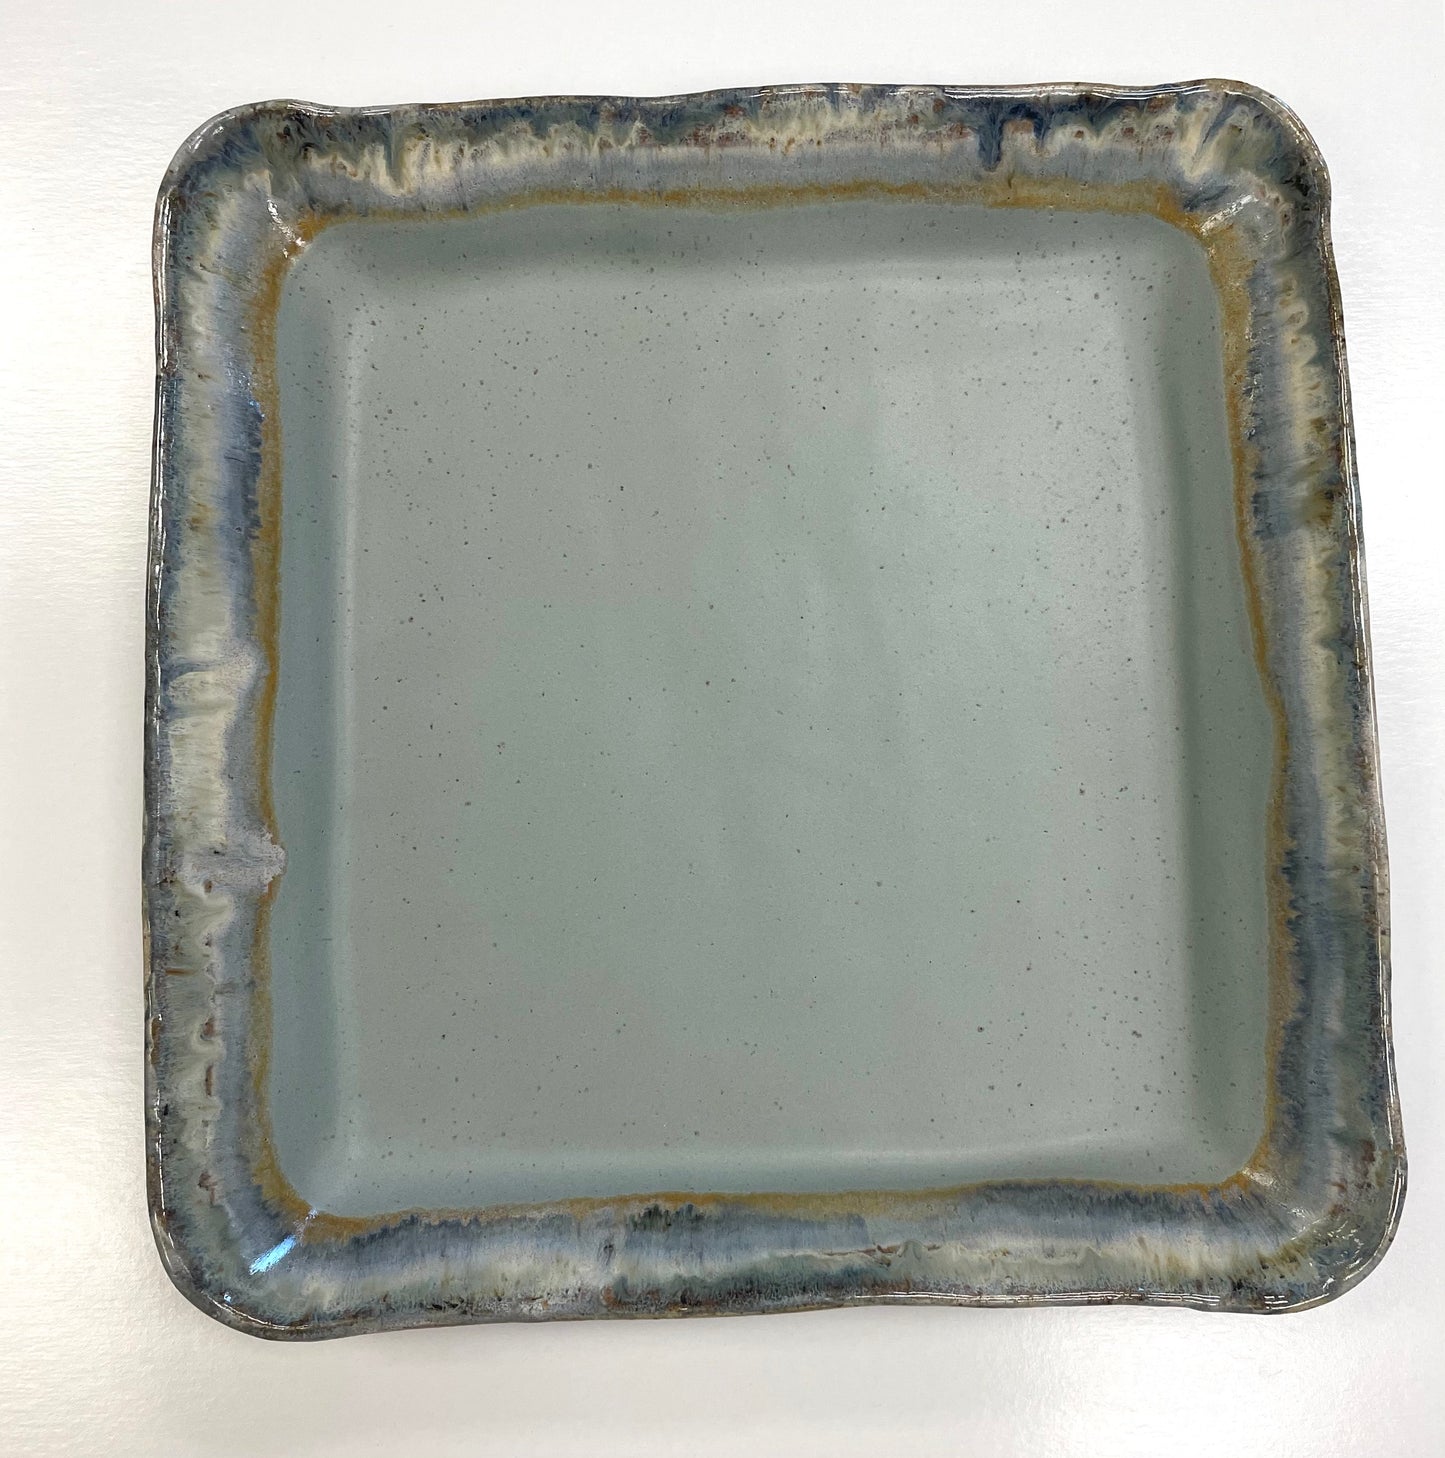 EB Brunch Tray in Peaceful Lapis